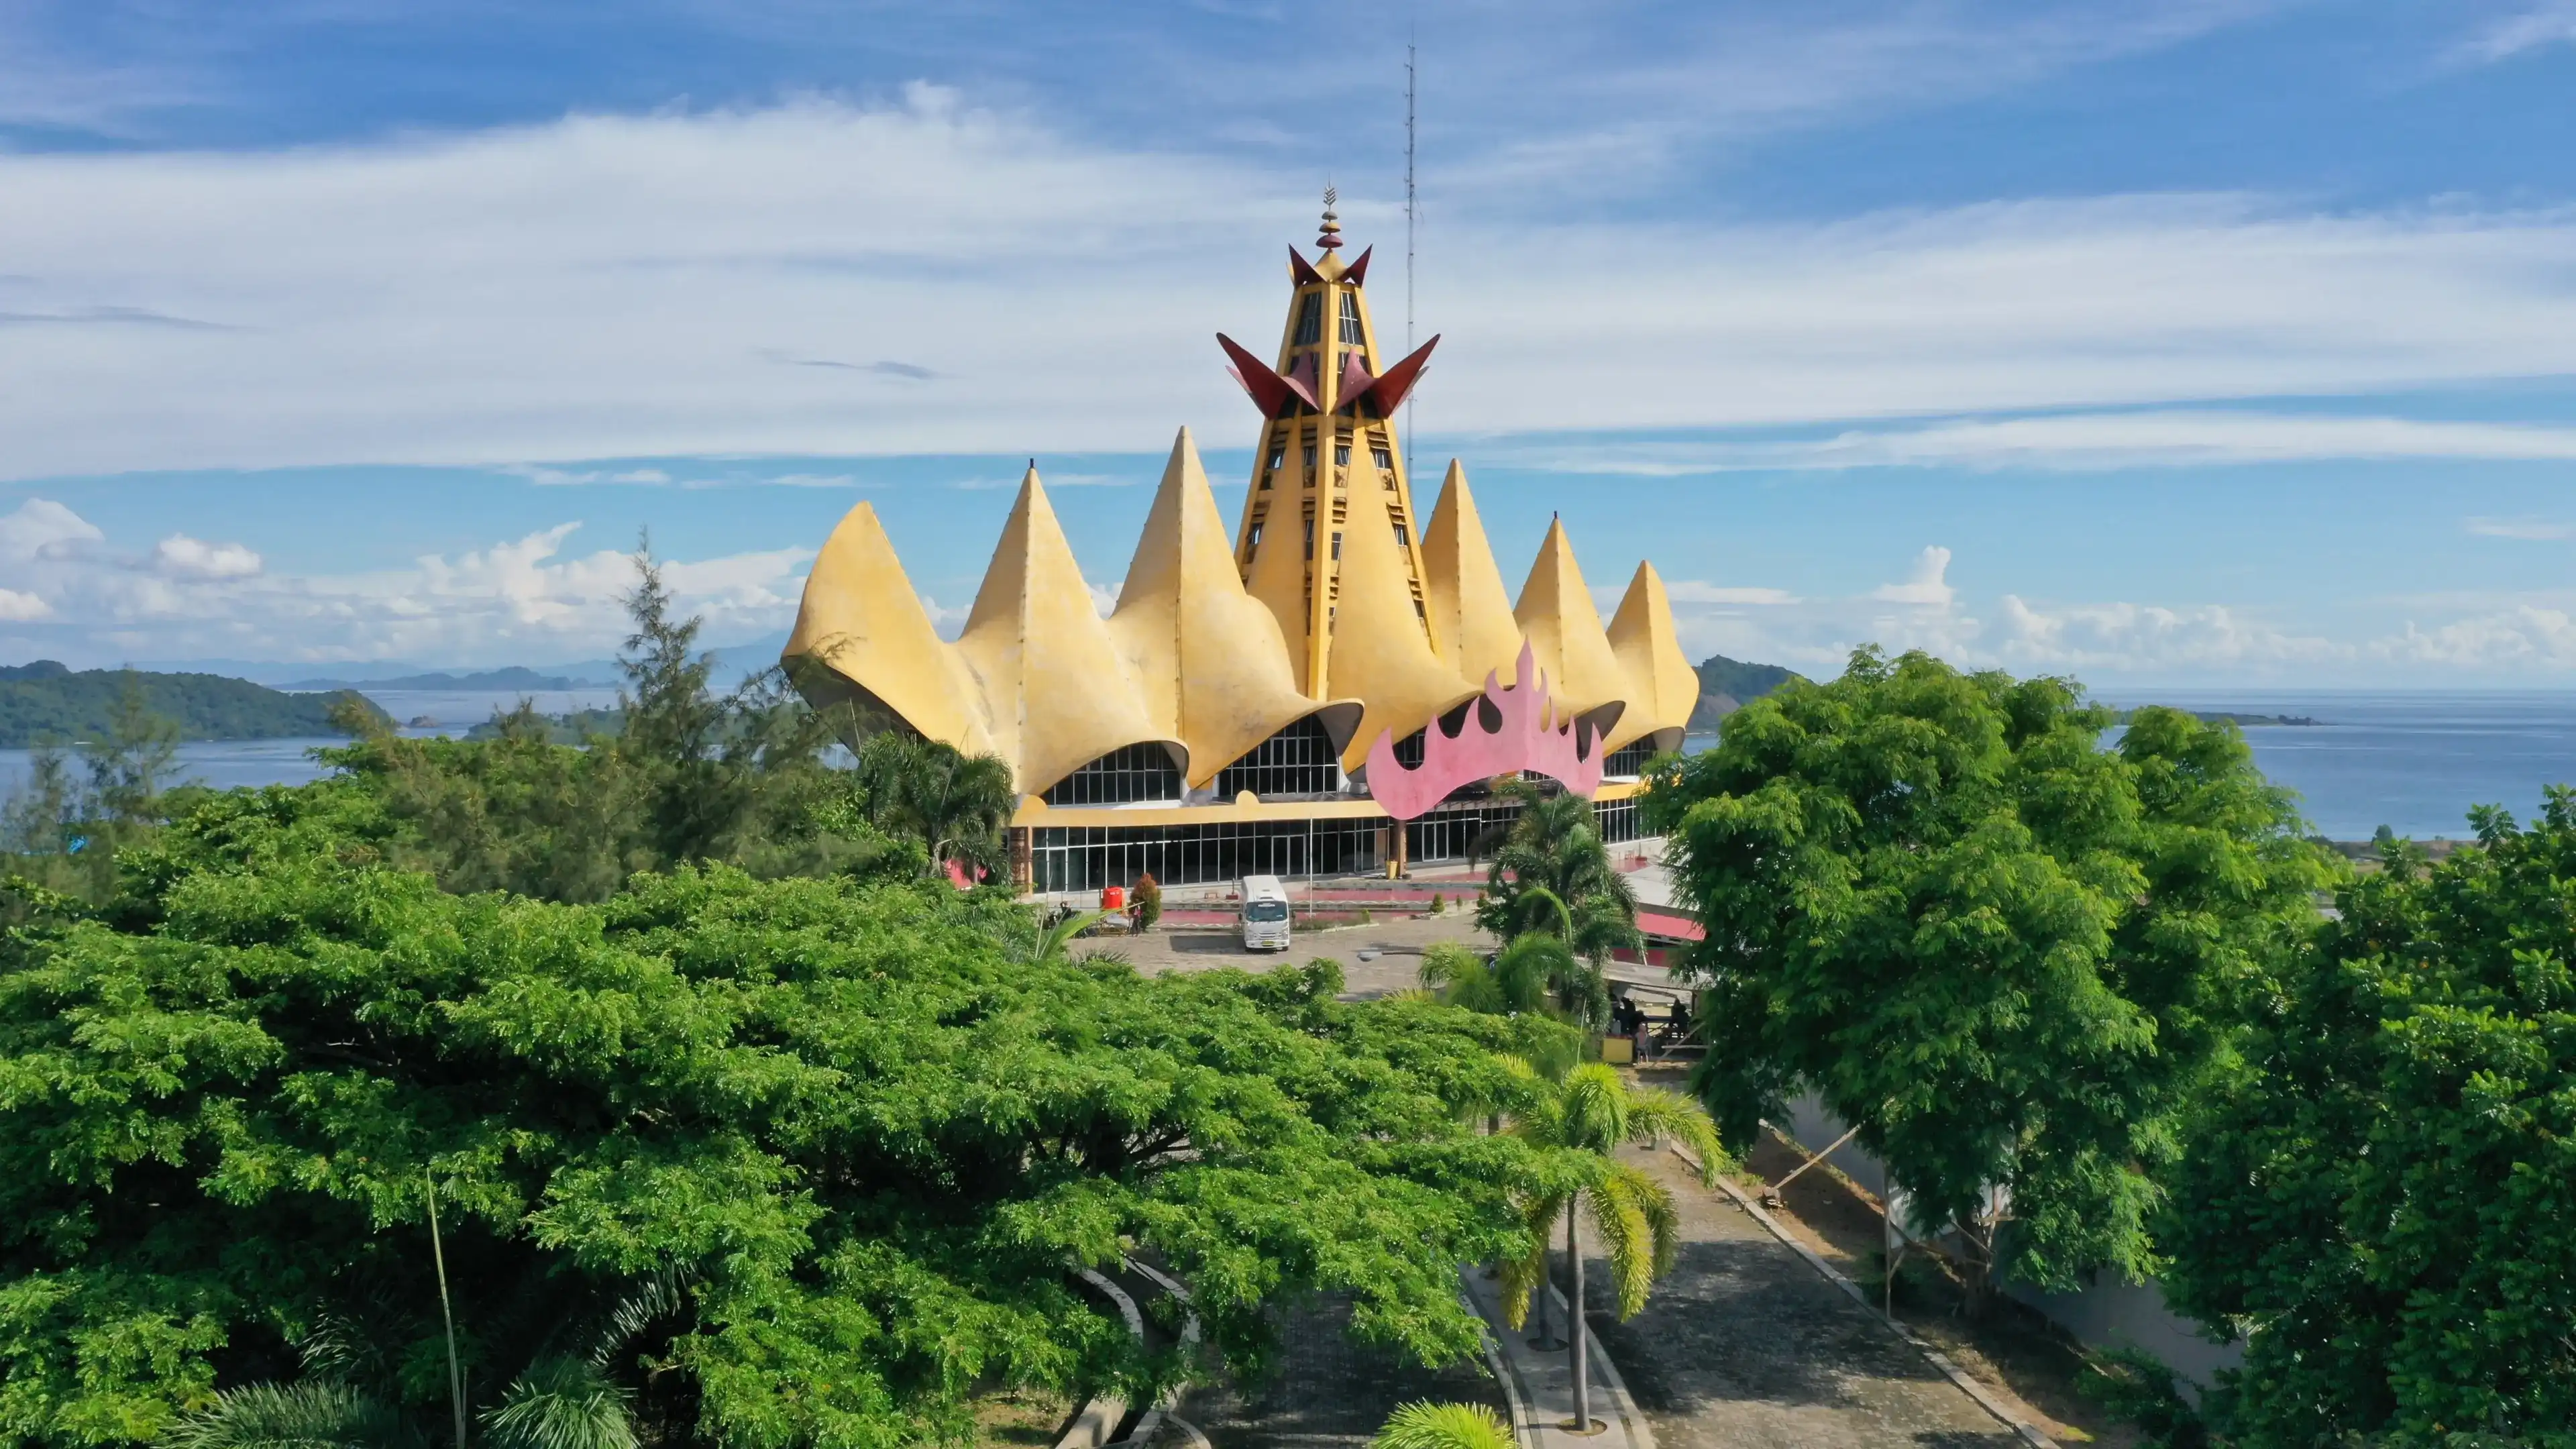 Lampung's landmark is called the siger tower